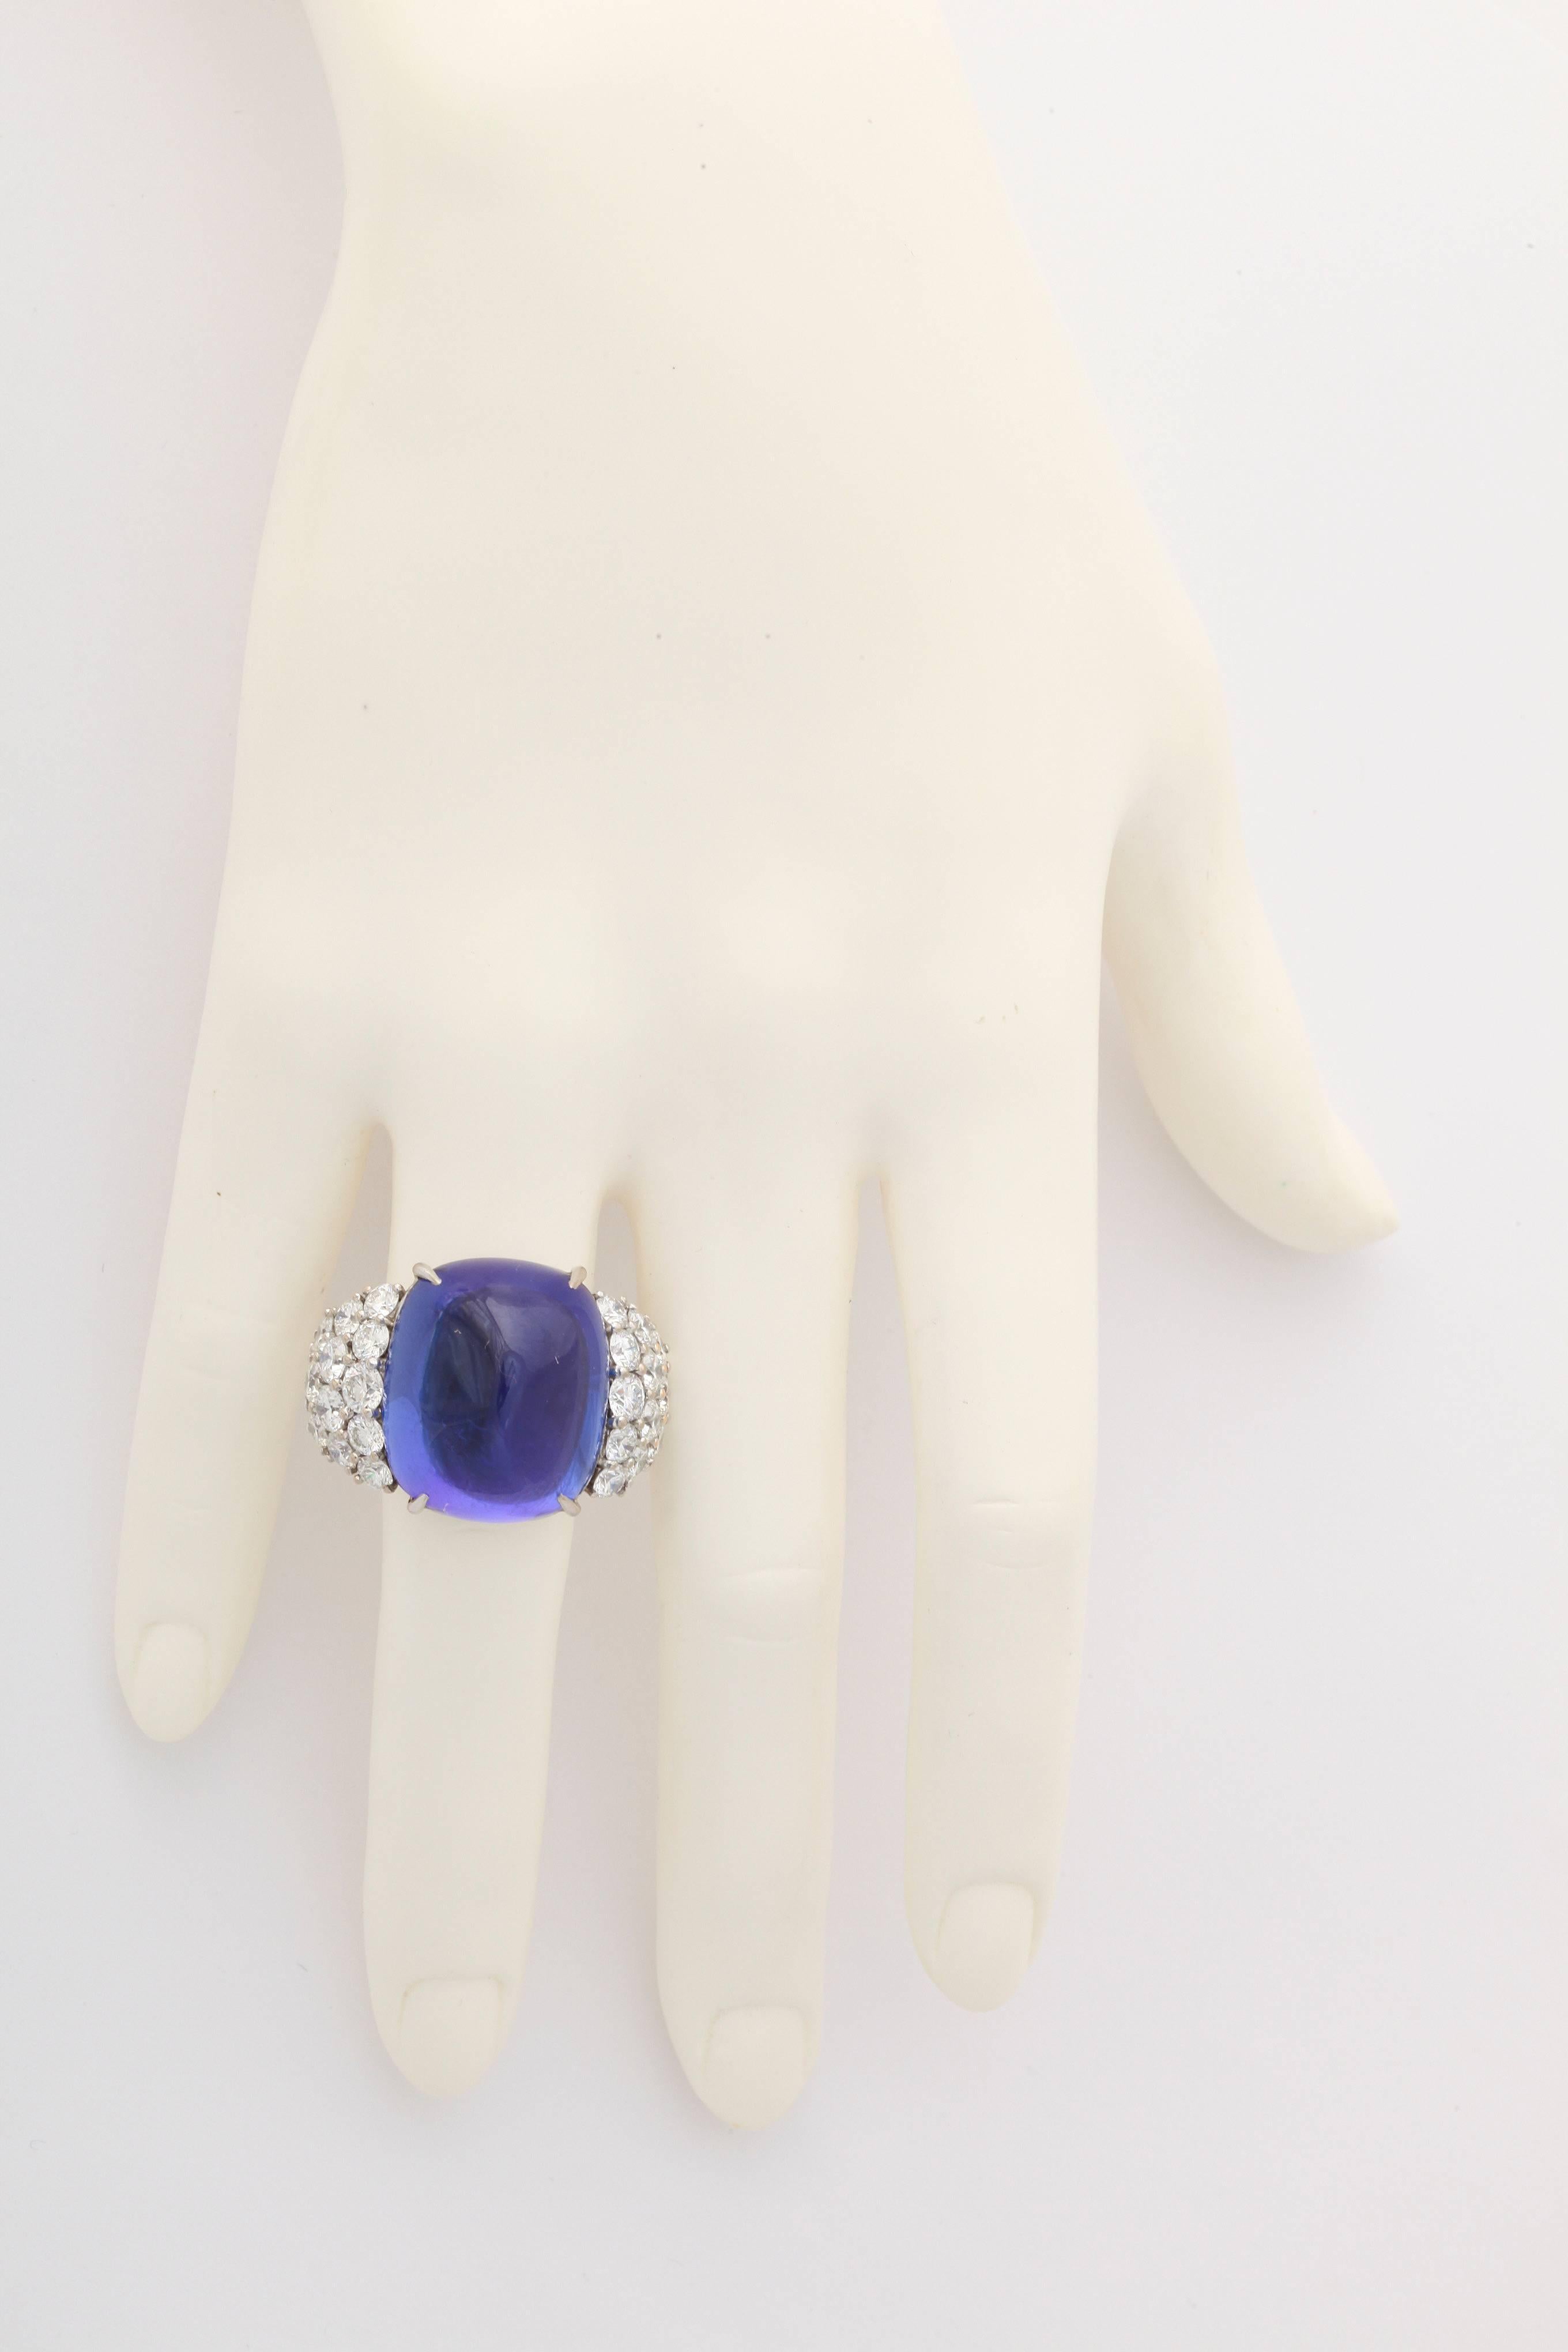 This incredible ring features a sugarloaf cut tanzanite weighing app. 44cts.  The stone is a rich, velvet blue color with undertones of deep purple.  Free of any eye visible inclusions, the size and quality make this stone a truly rare gem.  To